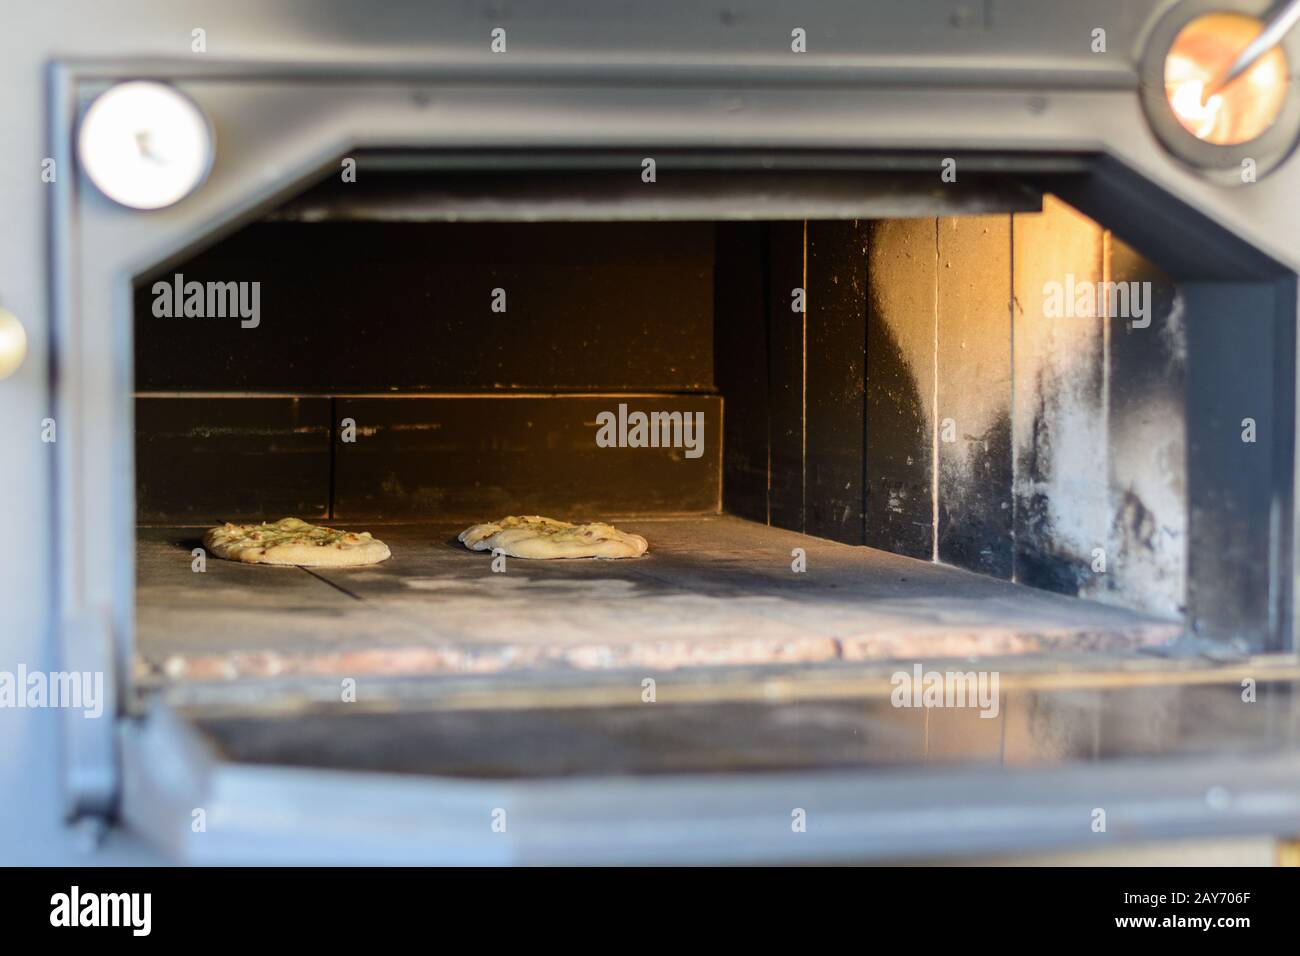 Pizzas in an old oven - close-up view into a large open oven Stock Photo